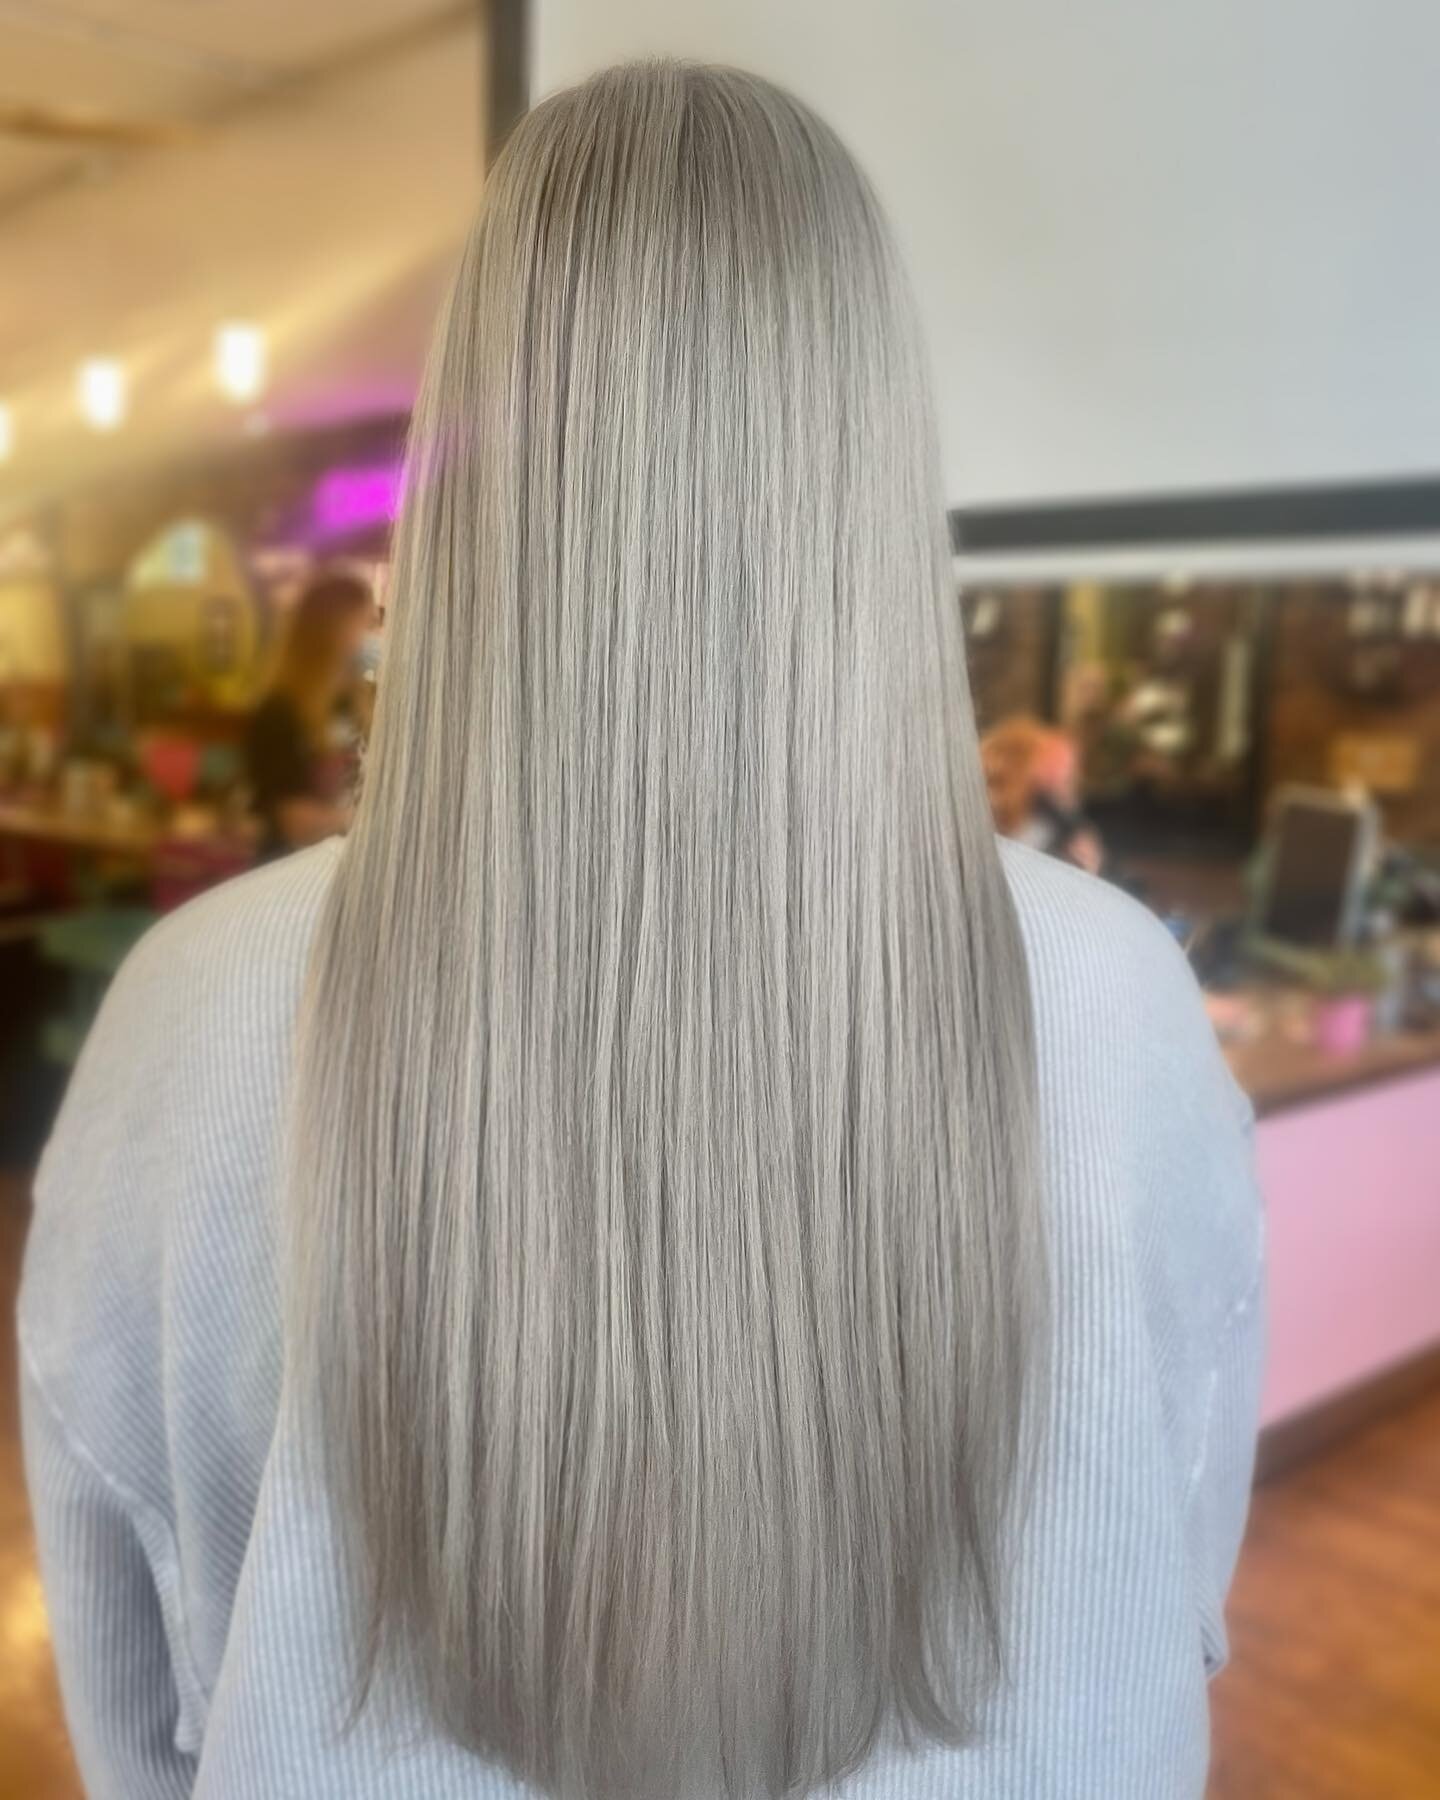 Online booking is available! Click the link in my bio

#lexingtonky #sharethelex #salonchacha #wella #blonde #lexingtonblonde